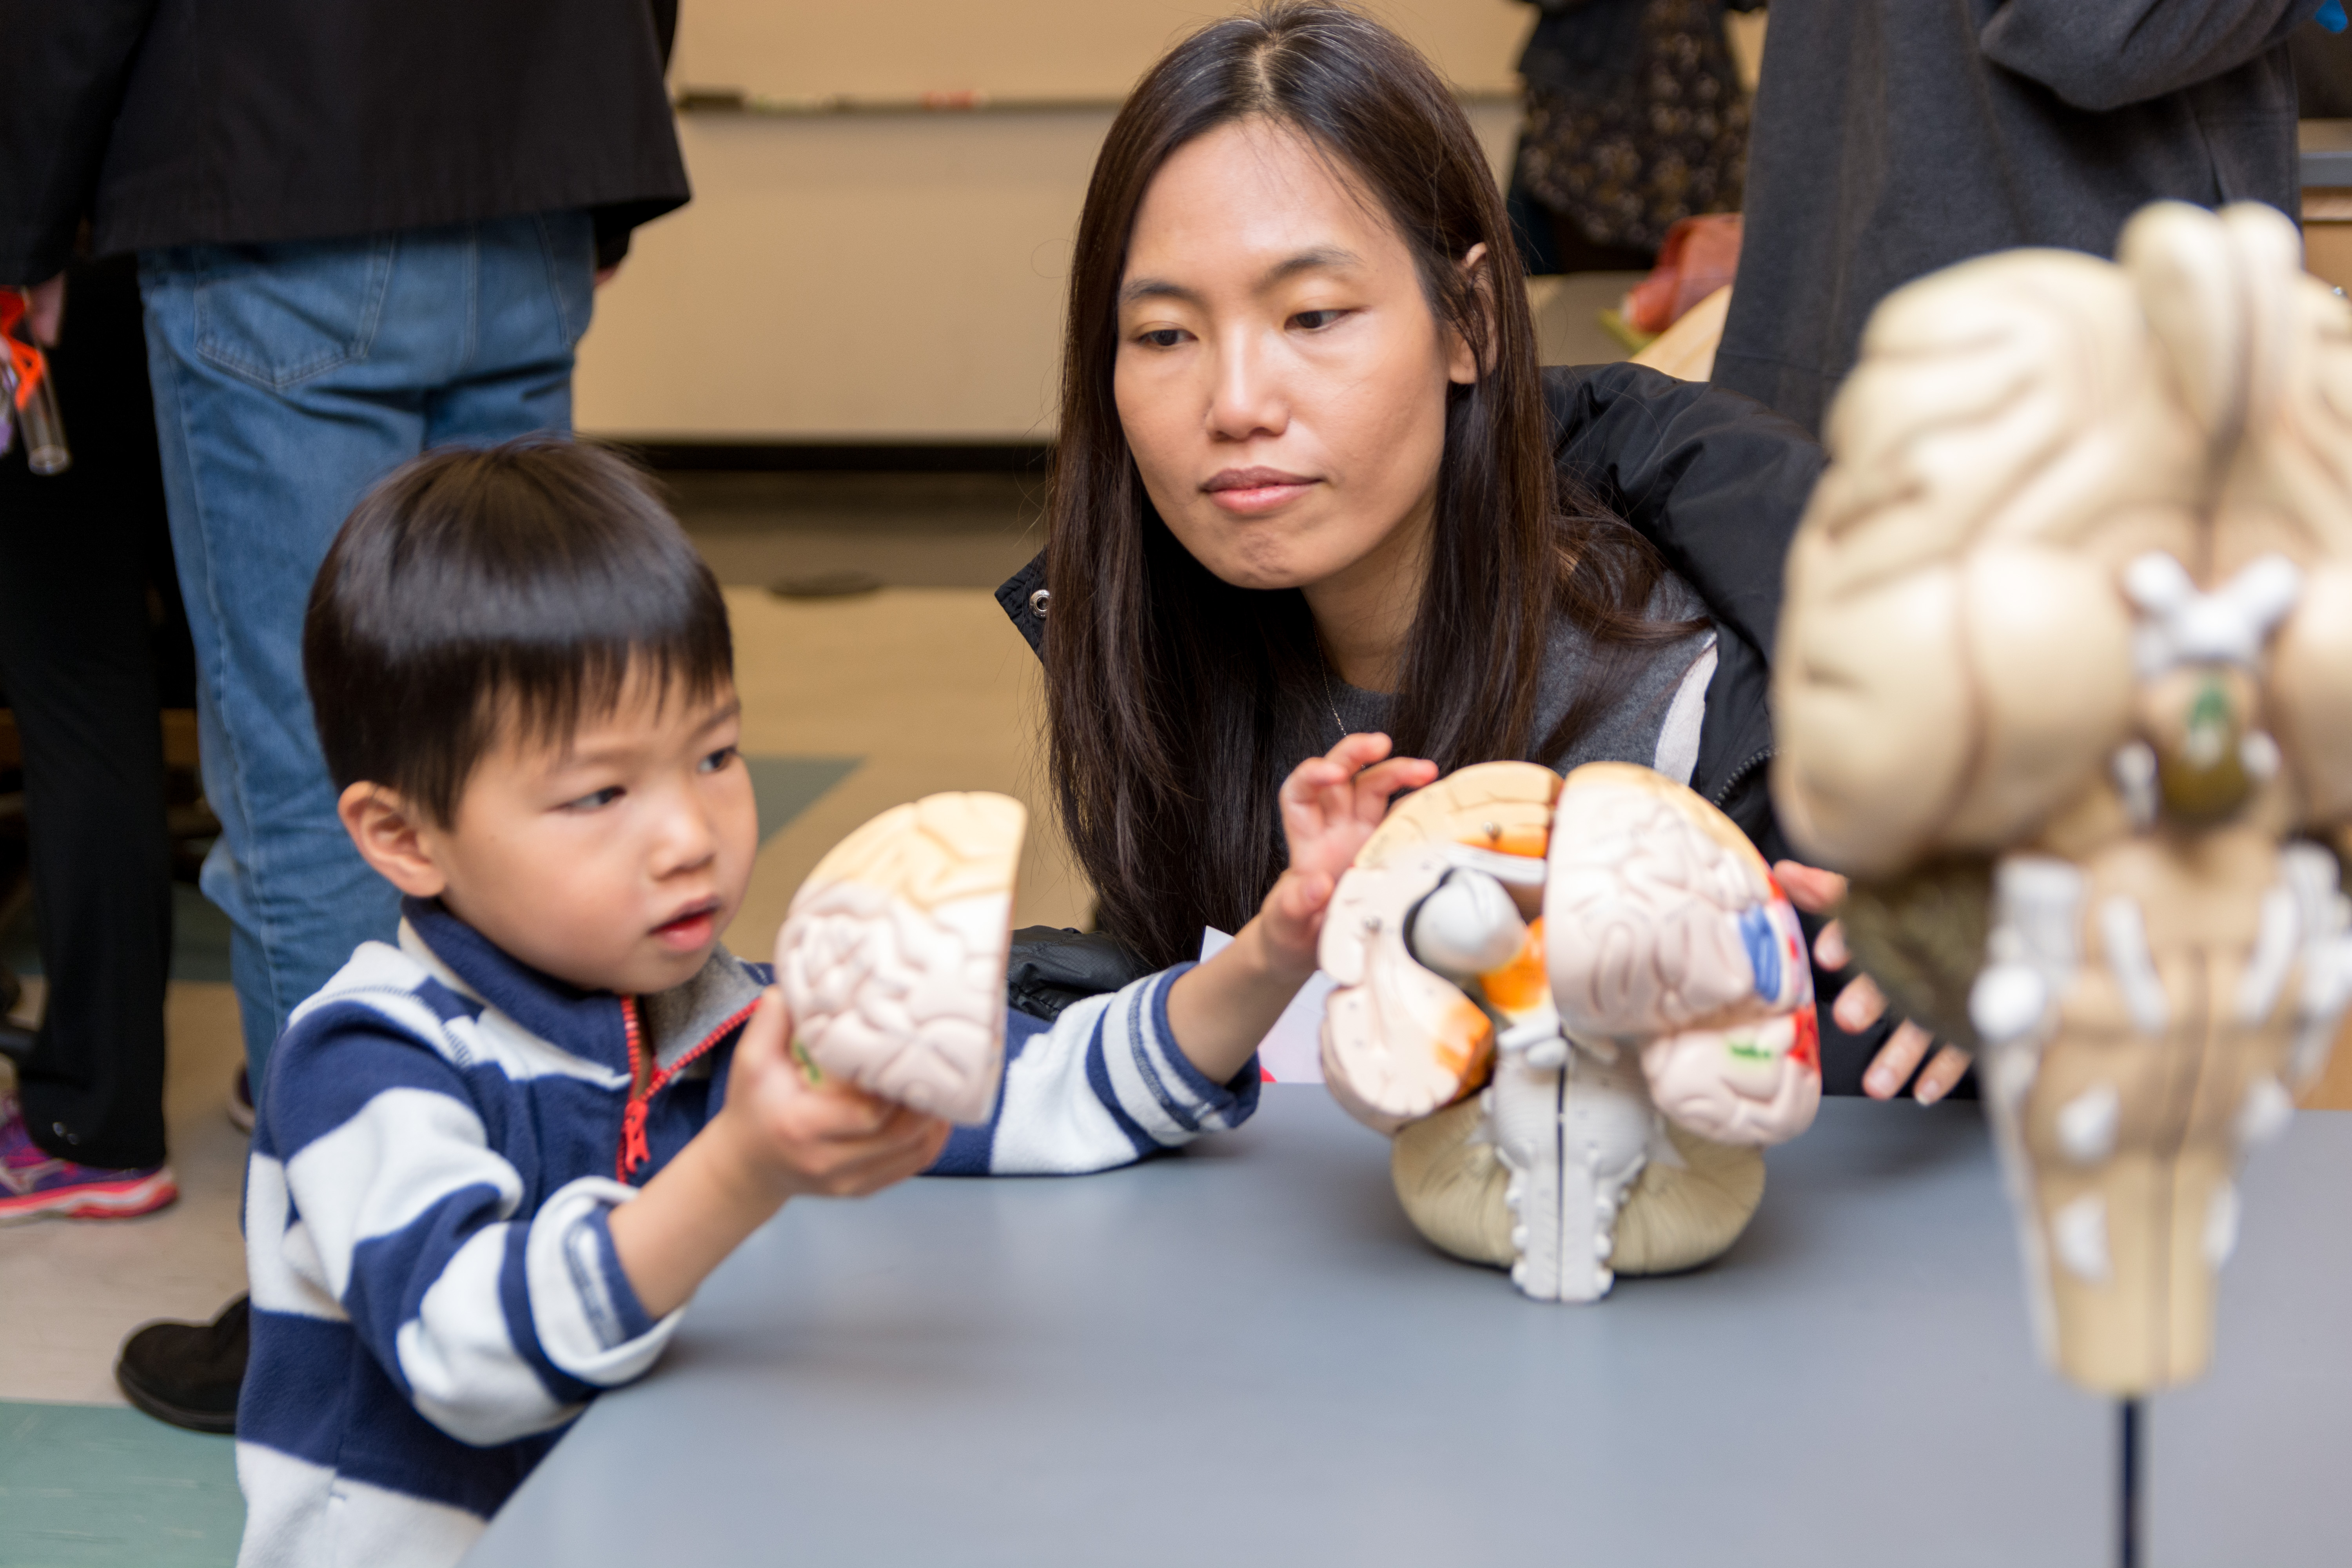 Asian boy with mother touching a brain model at the Atlanta Science Festival.